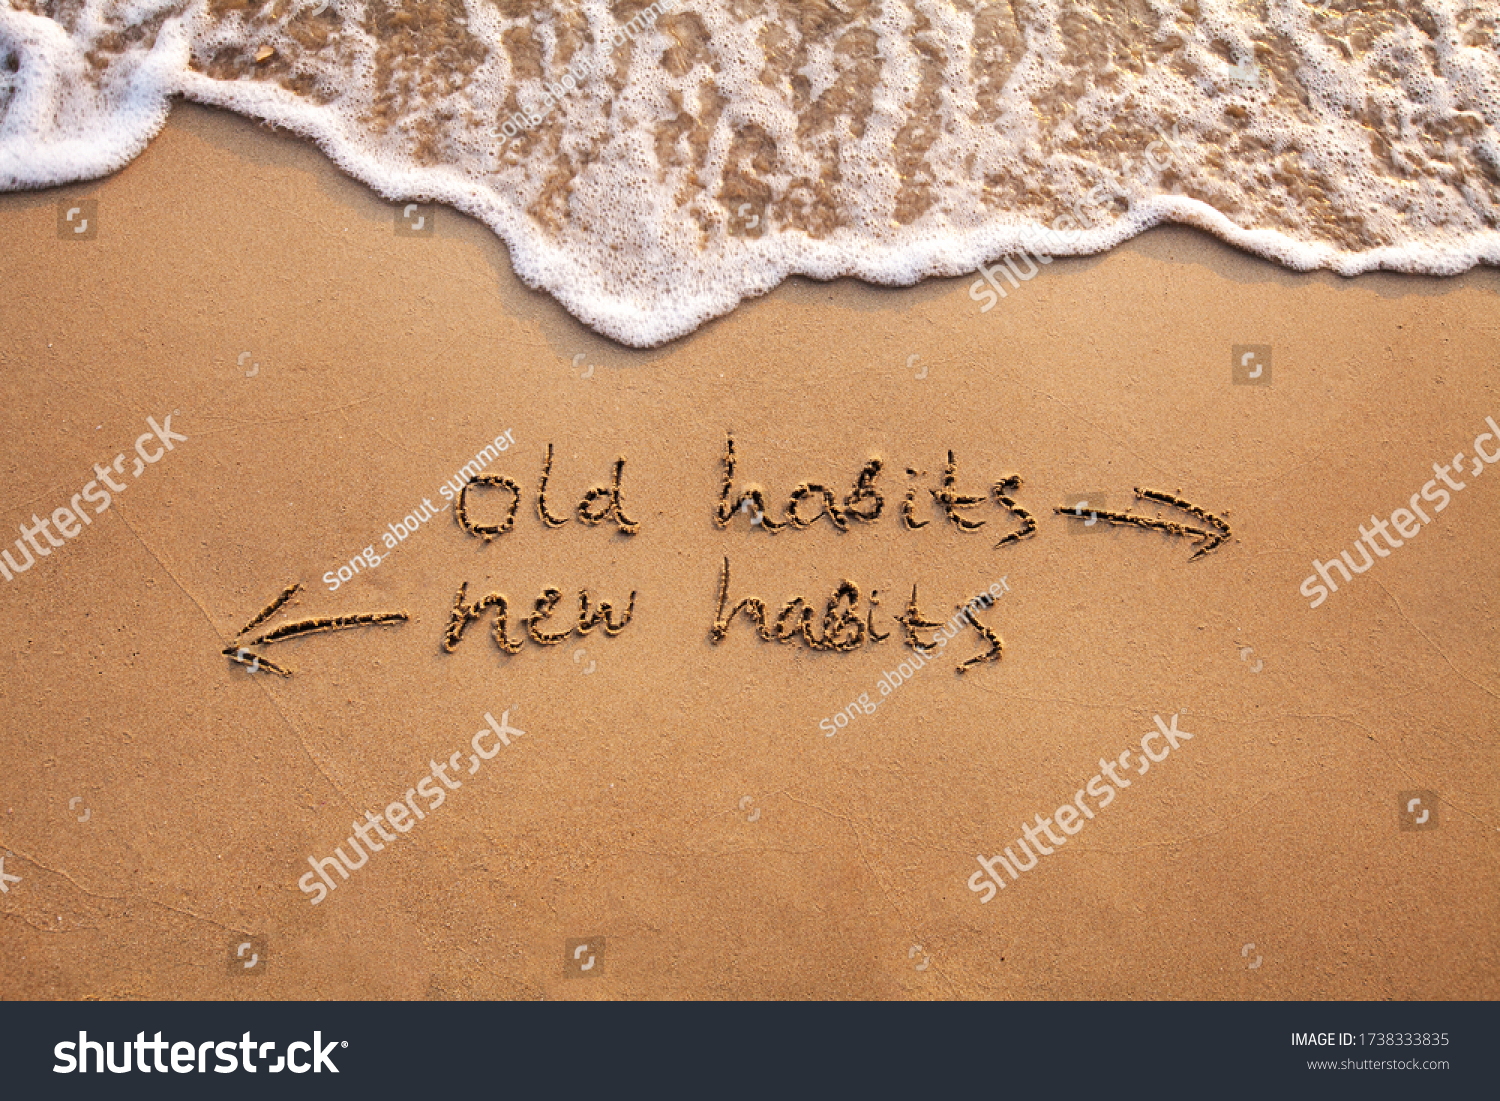 old habits vs new habits, life change concept written on sand #1738333835